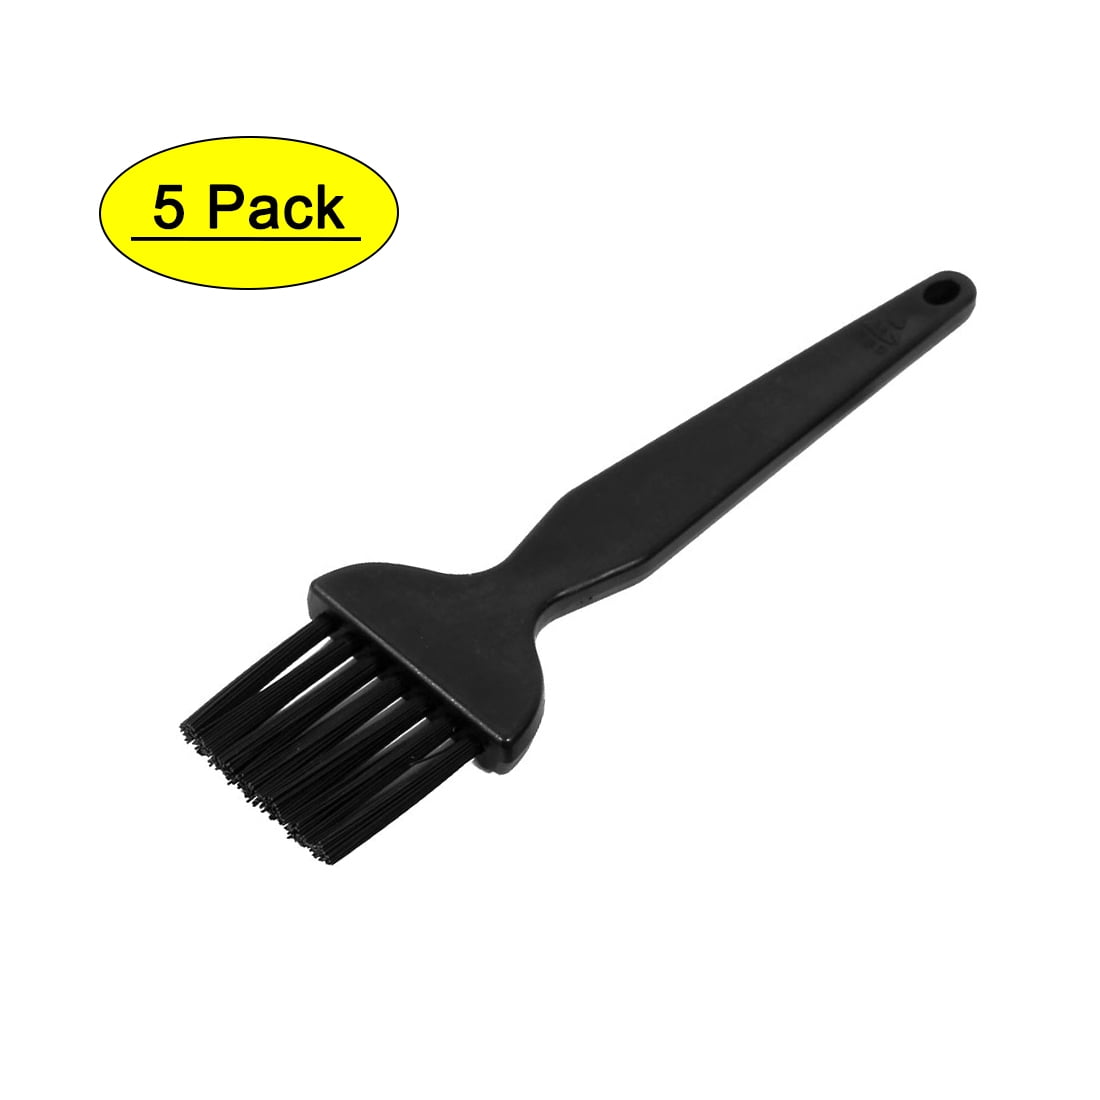 Plastic Handle PCB Motherboards Anti-Static ESD Cleaning Brush Black 